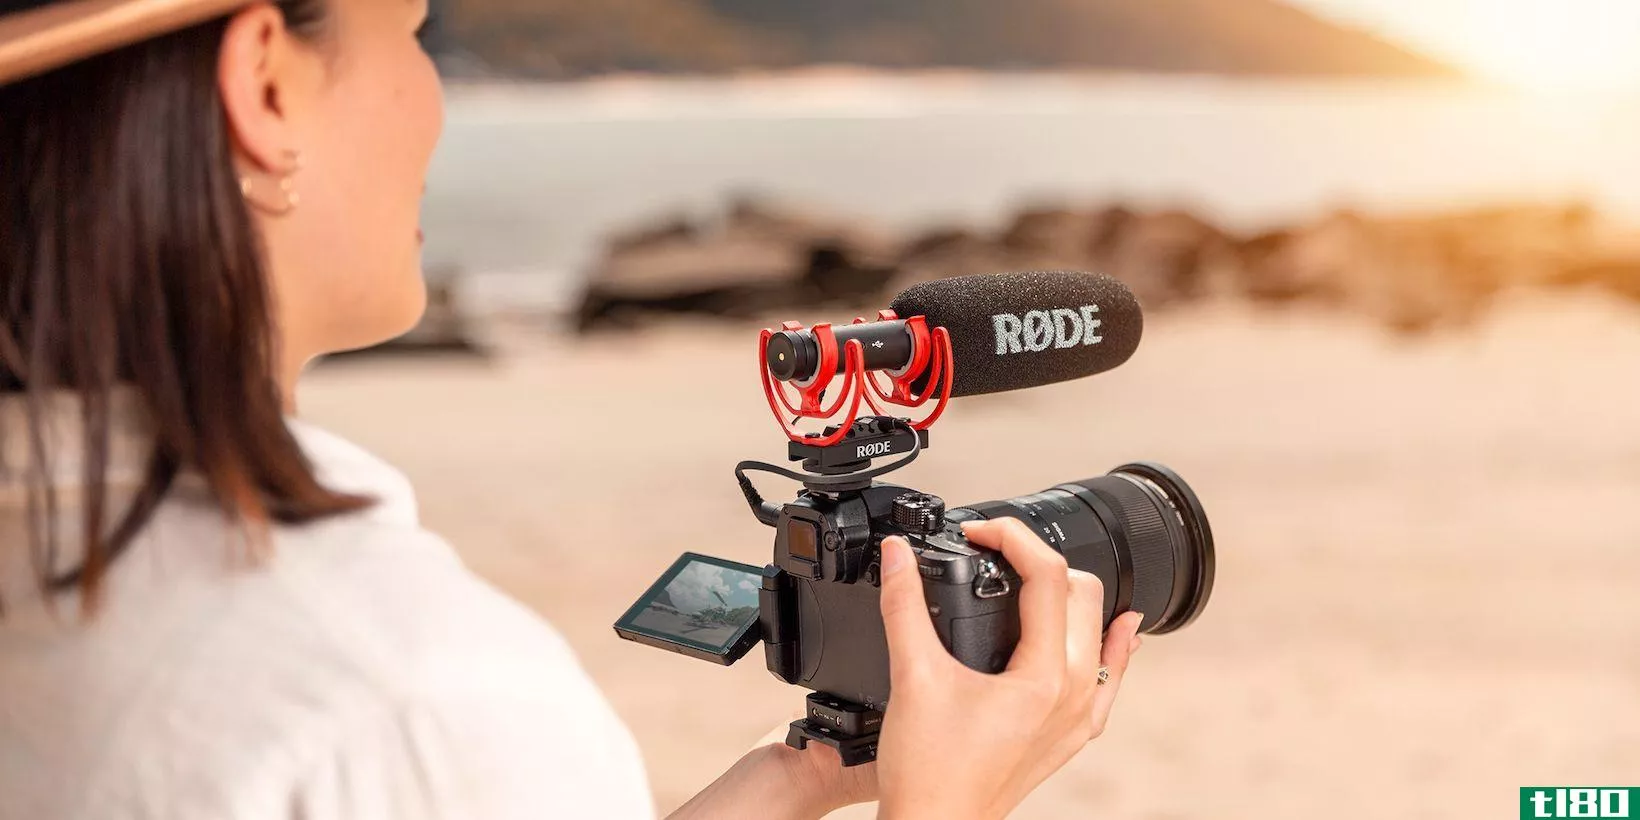 Rode VideoMic NTG attached to DSLR